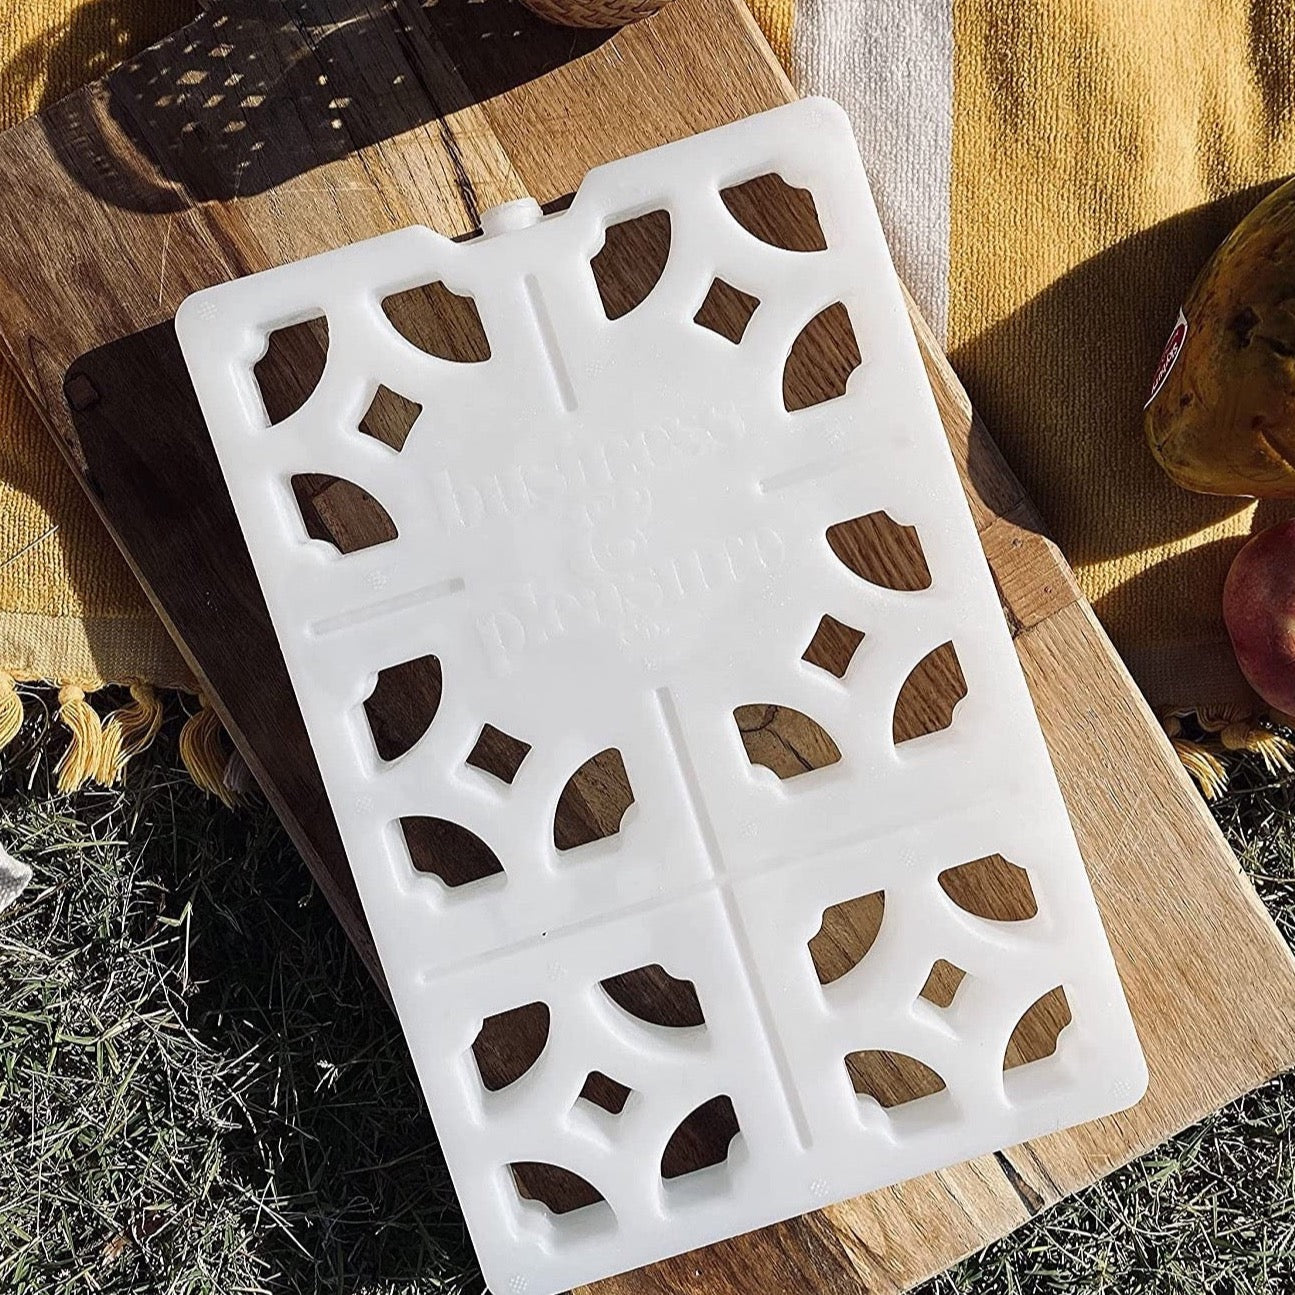 white breeze block ice pack on piece of wood in a picnic setting. Ice pack has cut outs resembling mosaic pattern